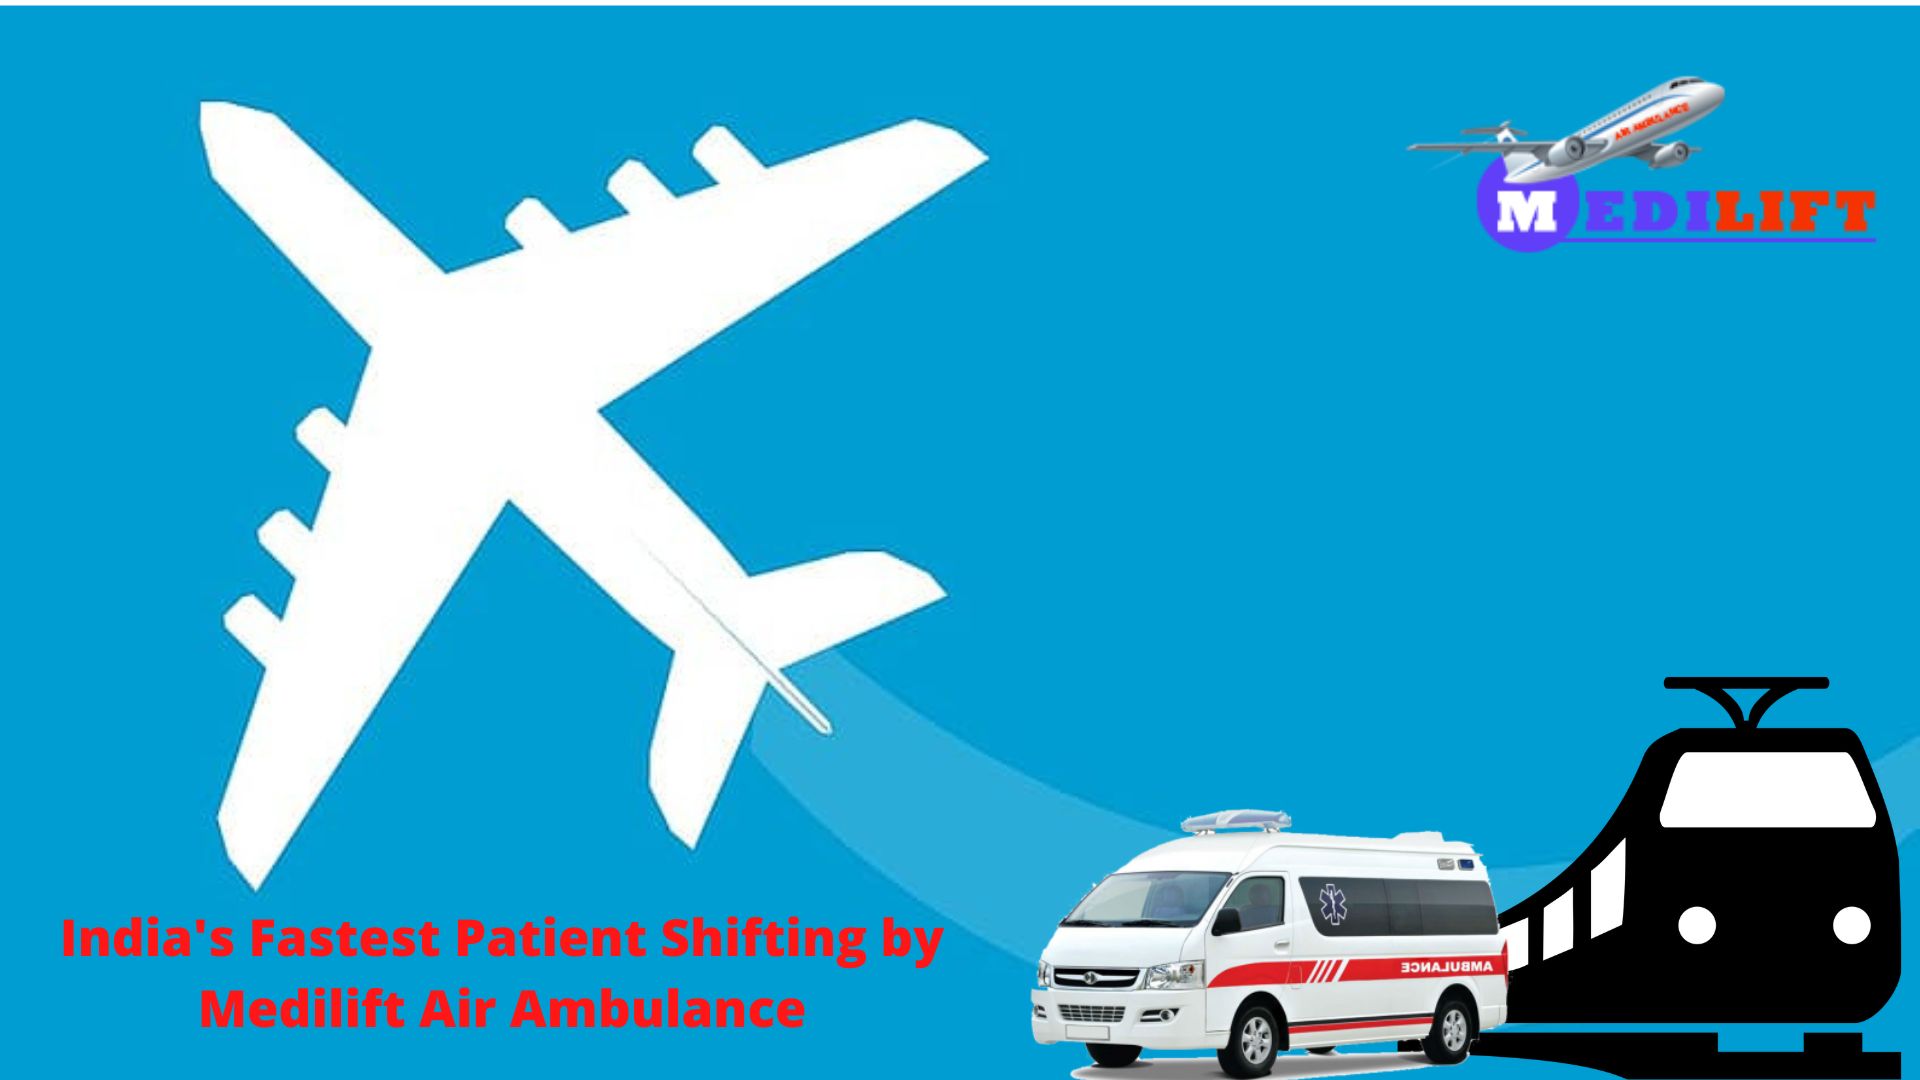 Use Medilift Air Ambulance in Raipur with Authorized Medical Endorsement